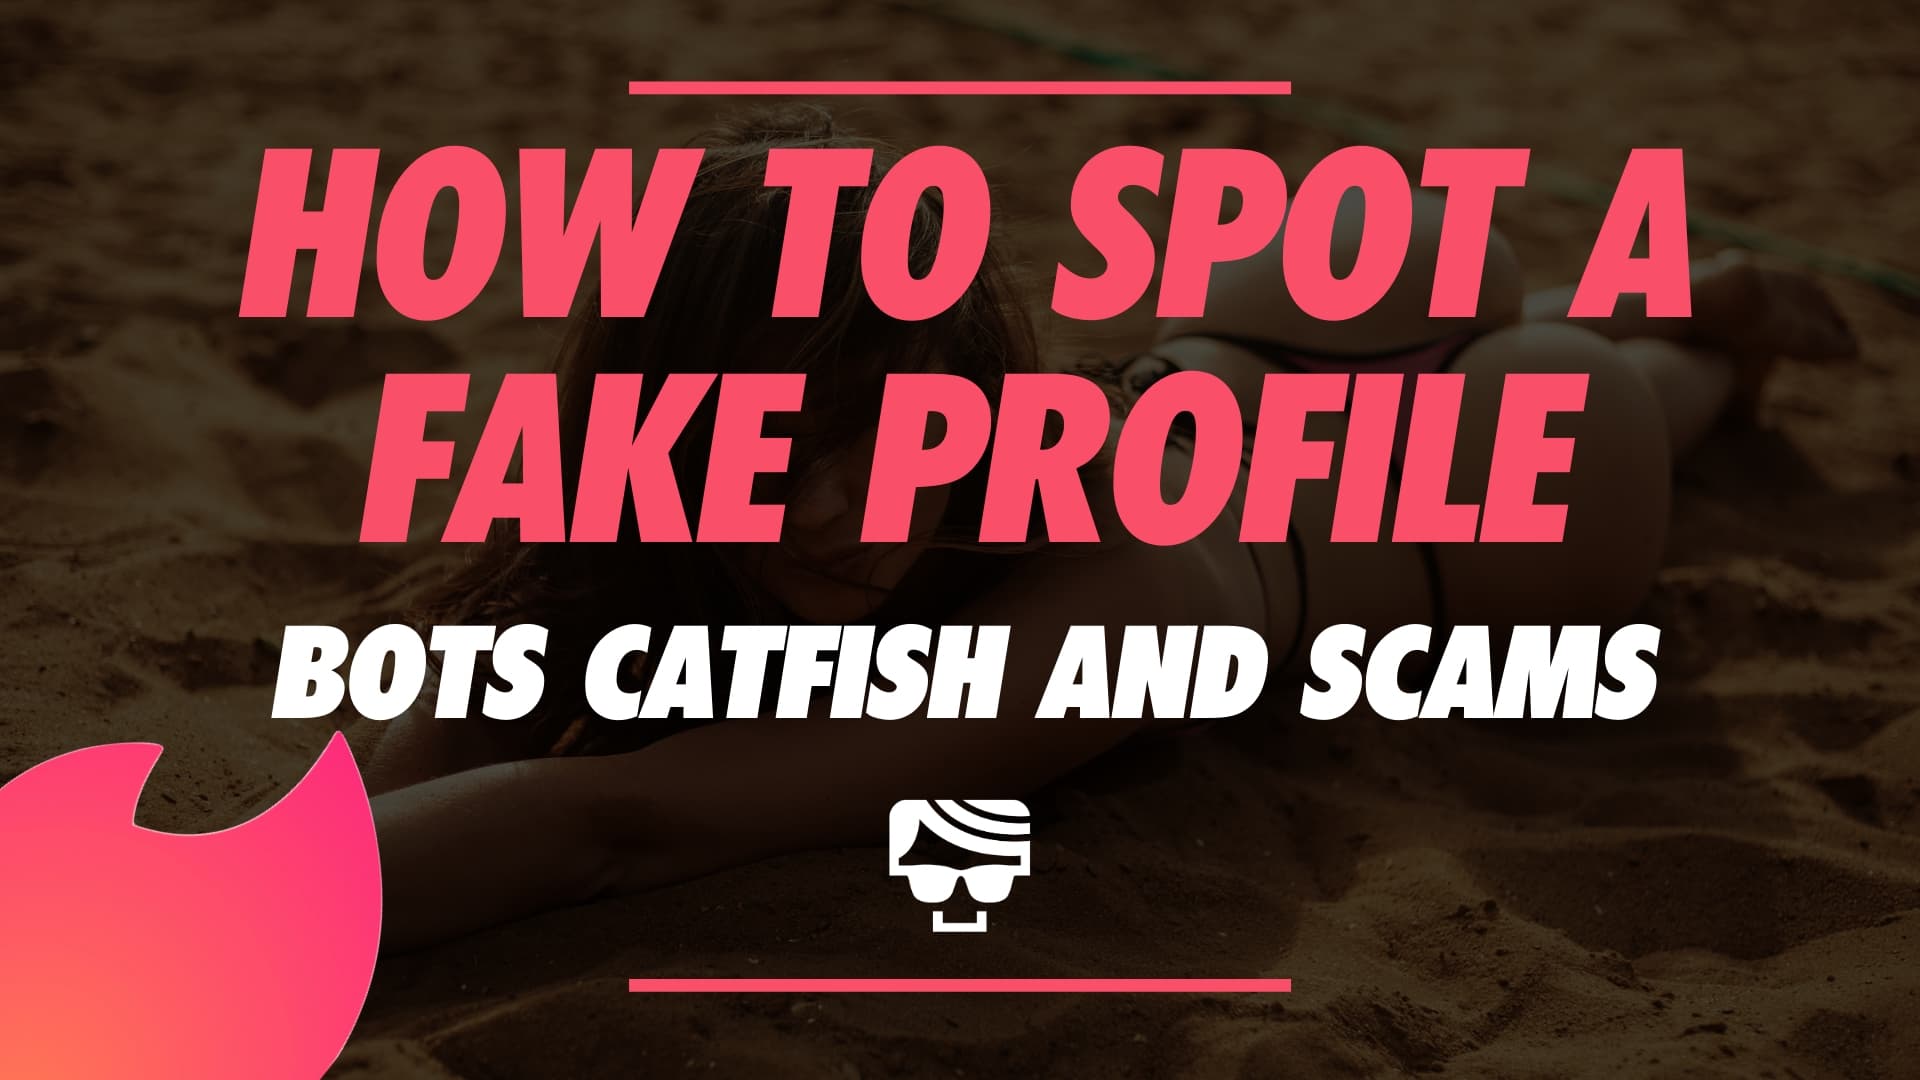 Tinder bots and catfish - how to spot them